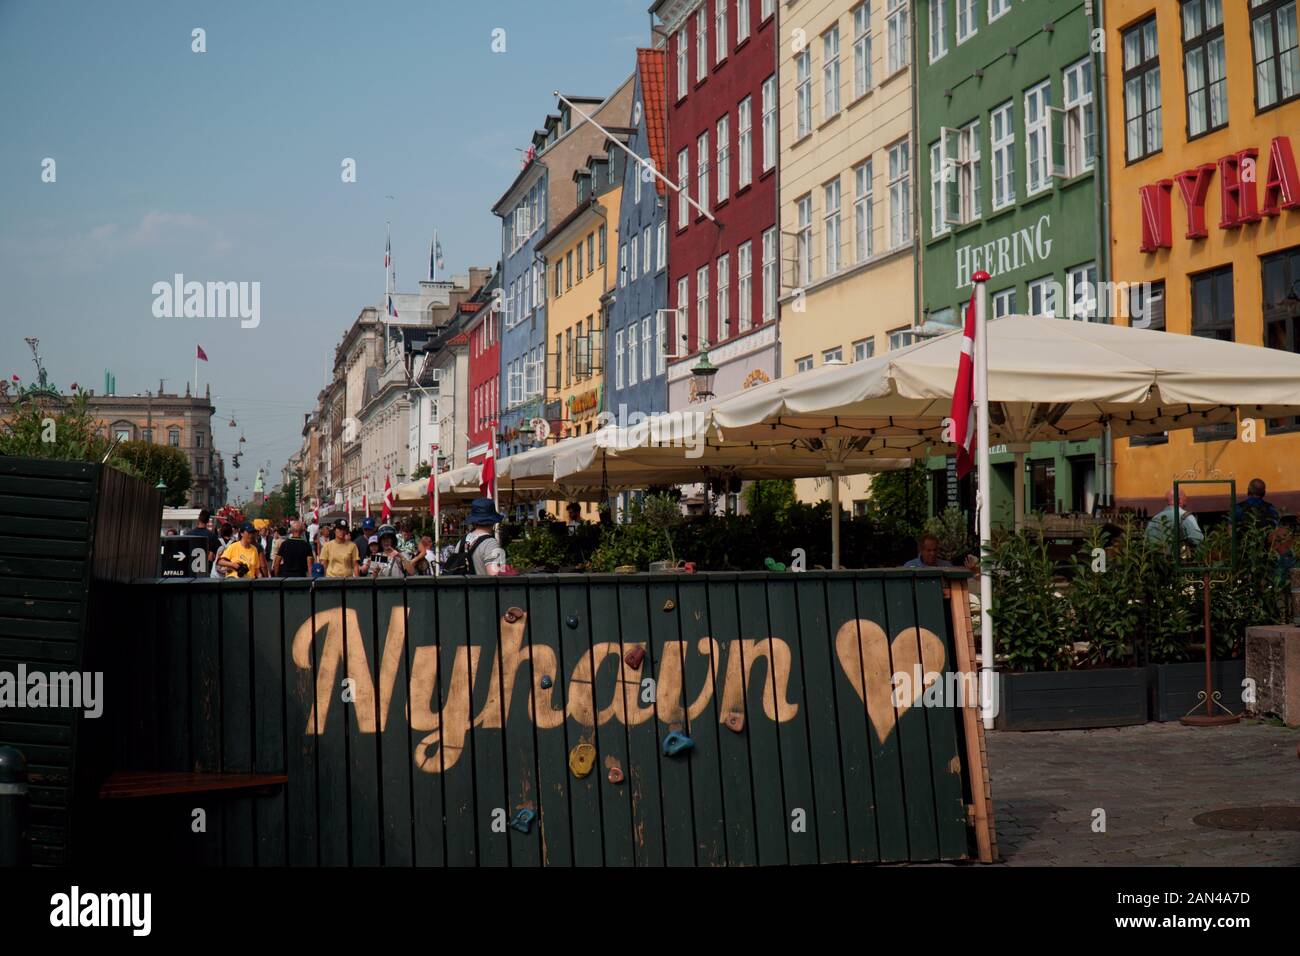 Nyhavn sign with an array of colourful houses in the background Stock Photo